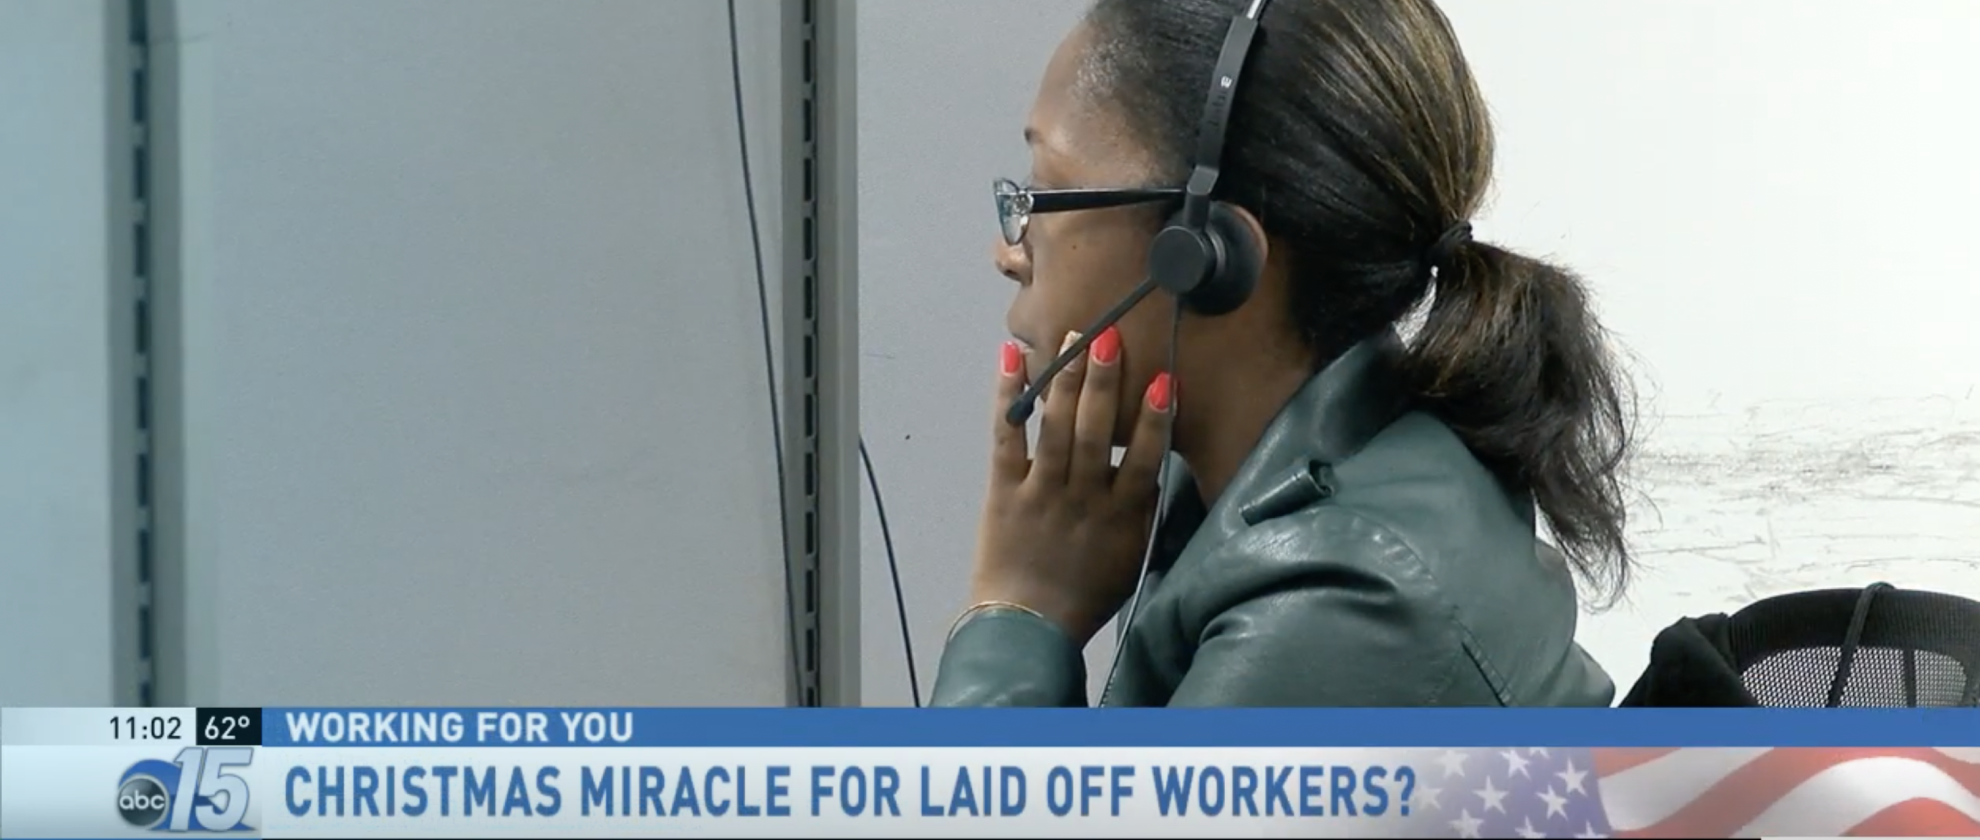 Screen capture of an abc news mention of Aventus. On screen, a black woman wearing a headset and an overlayed header: 'Christmas Miracle for Laid Off Workers?'